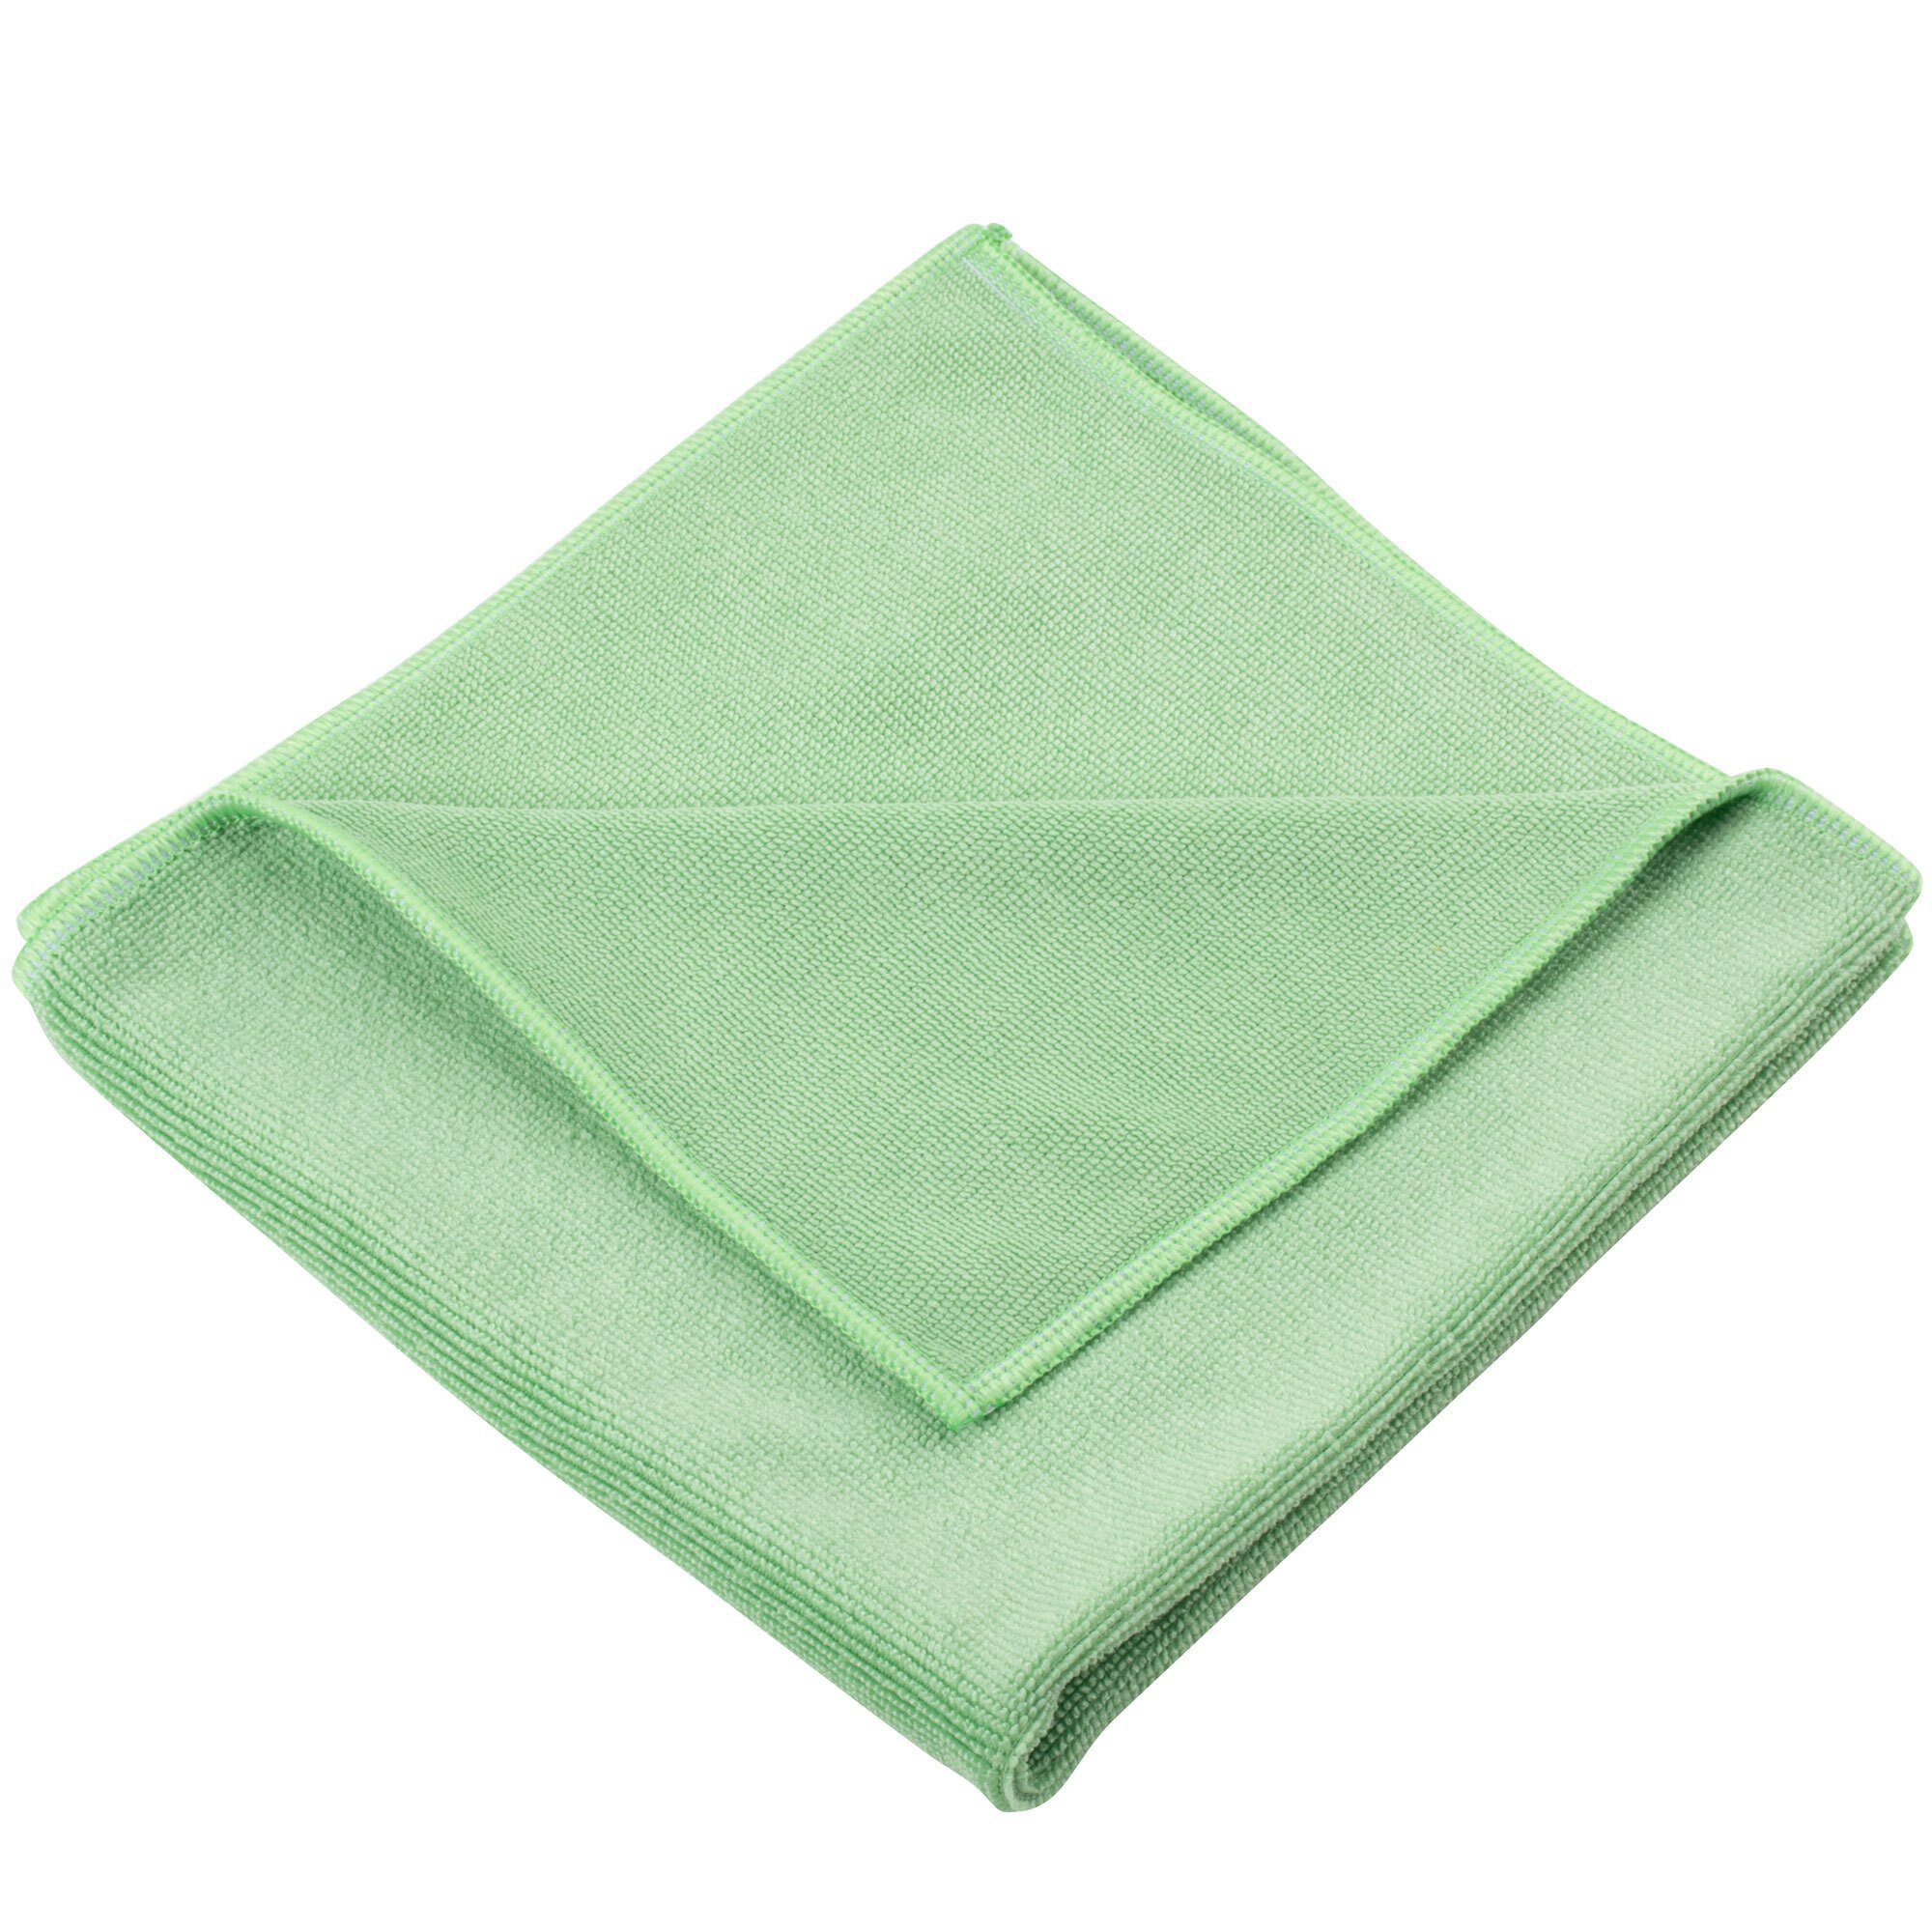 Unger Mf400 Smartcolor Microwipe 16 X 15 Green Heavy Duty Microfiber Cleaning Cloth 10 Pack